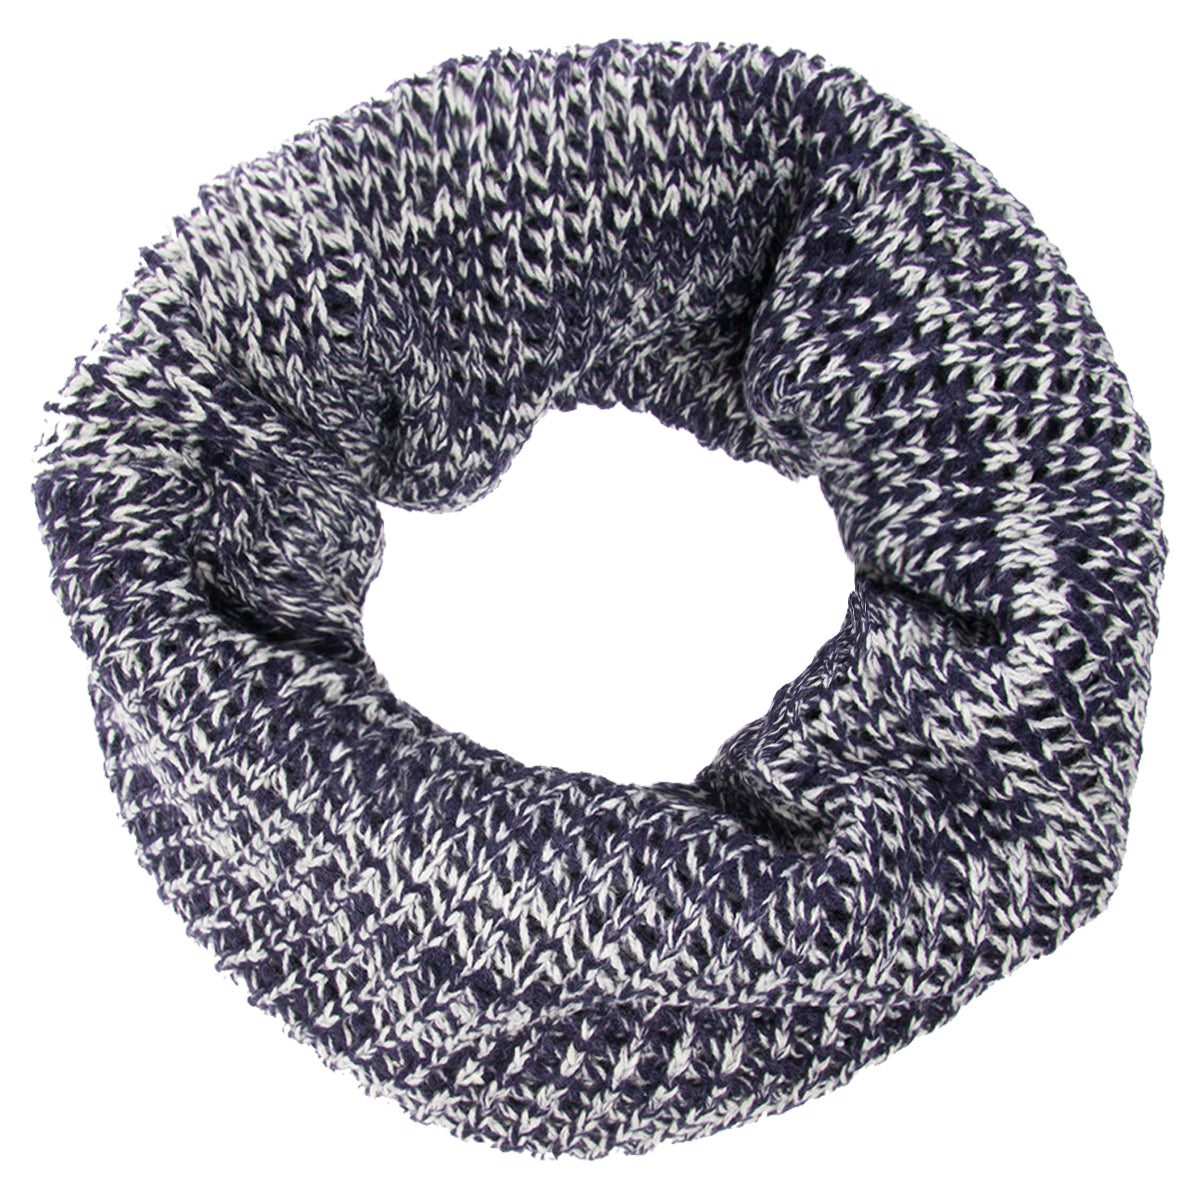 Reversible Knit Cowl Infinity Scarf by The Royal Standard